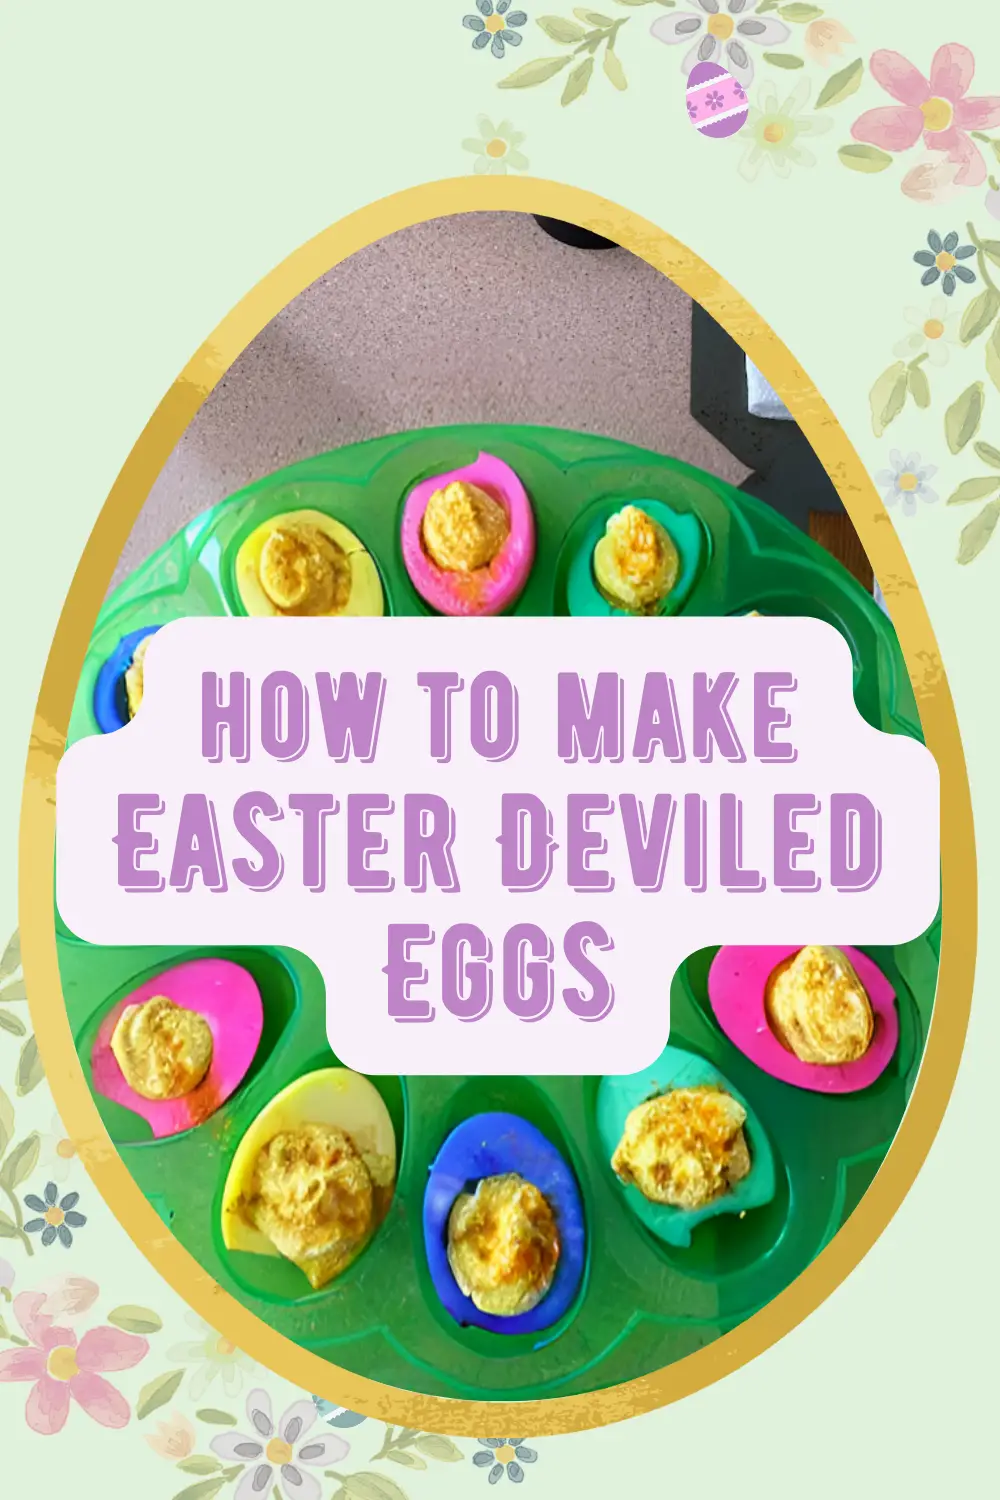 The Best Easter Deviled Eggs Guests Will Love